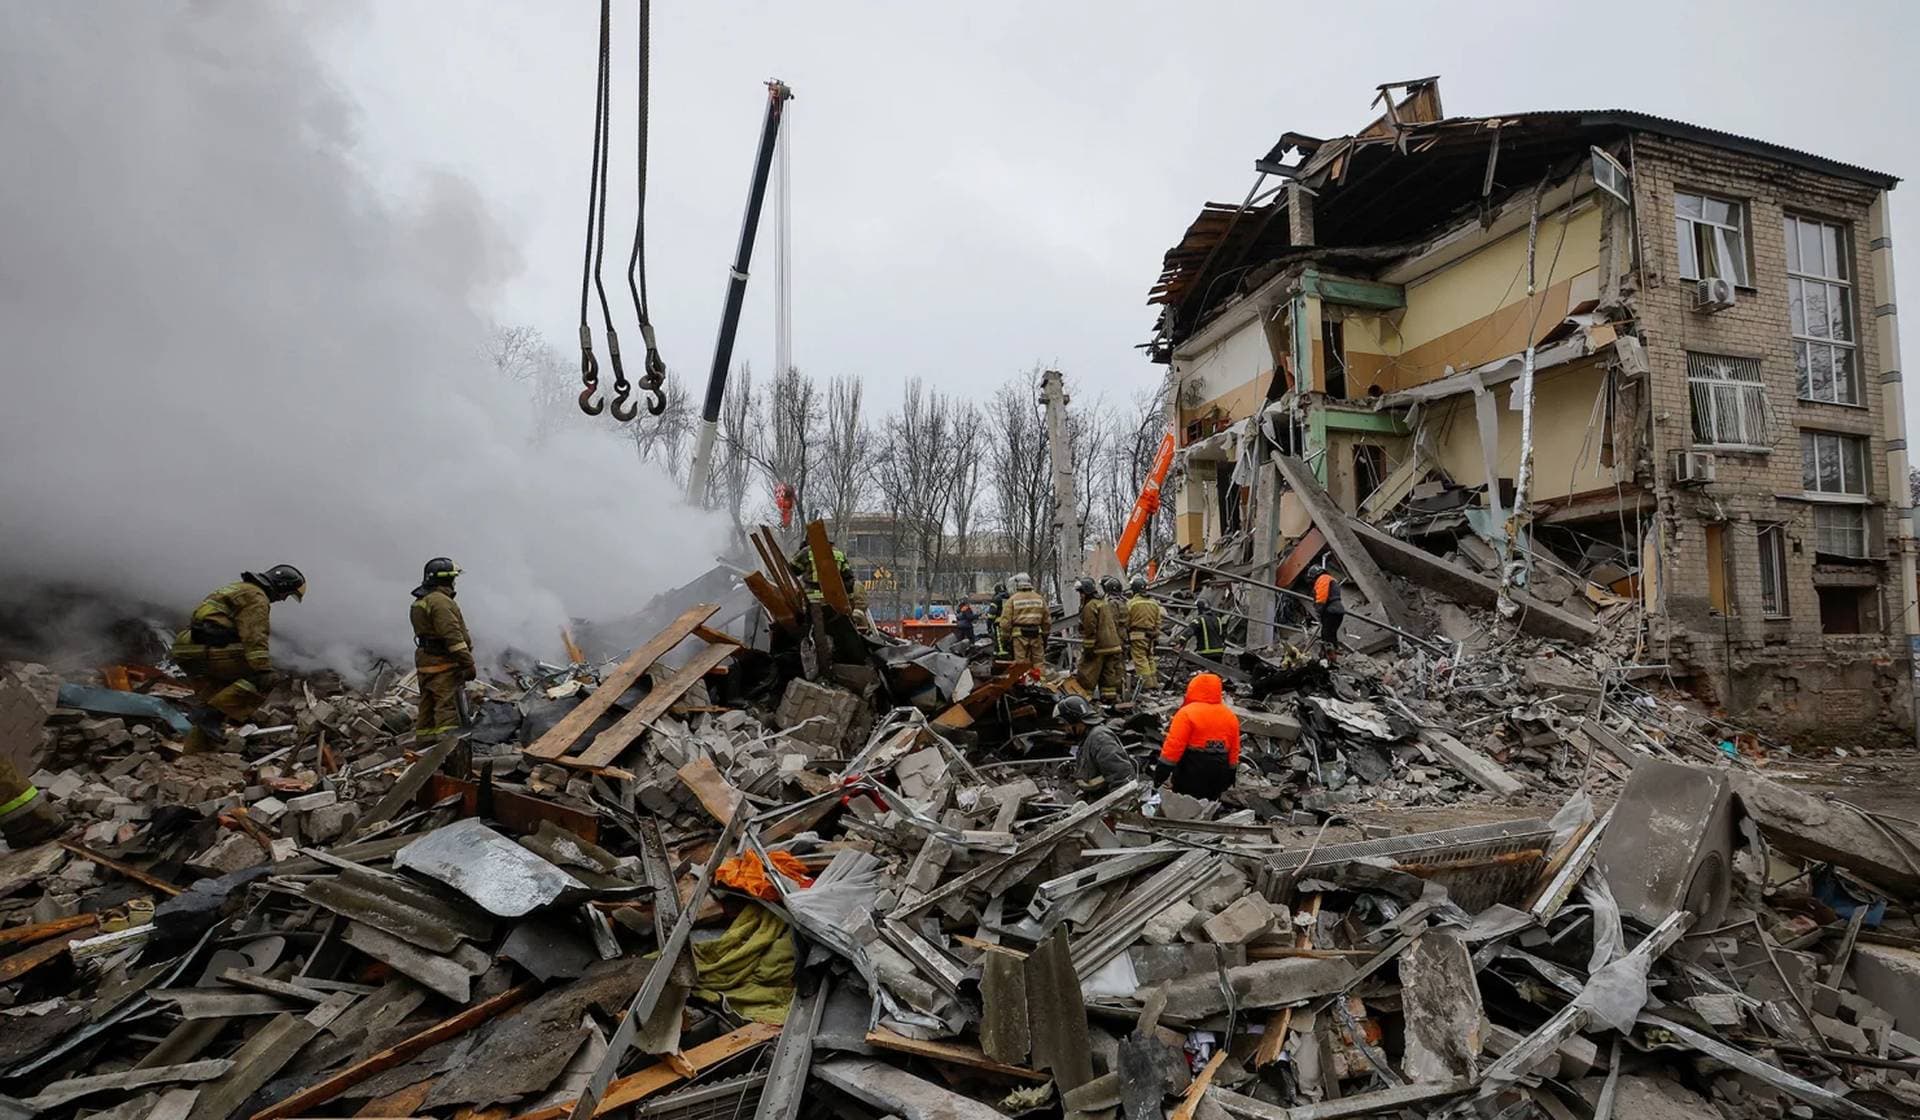 Emergency personnel work among debris at the site where a building was heavily damaged in recent shelling in Donetsk